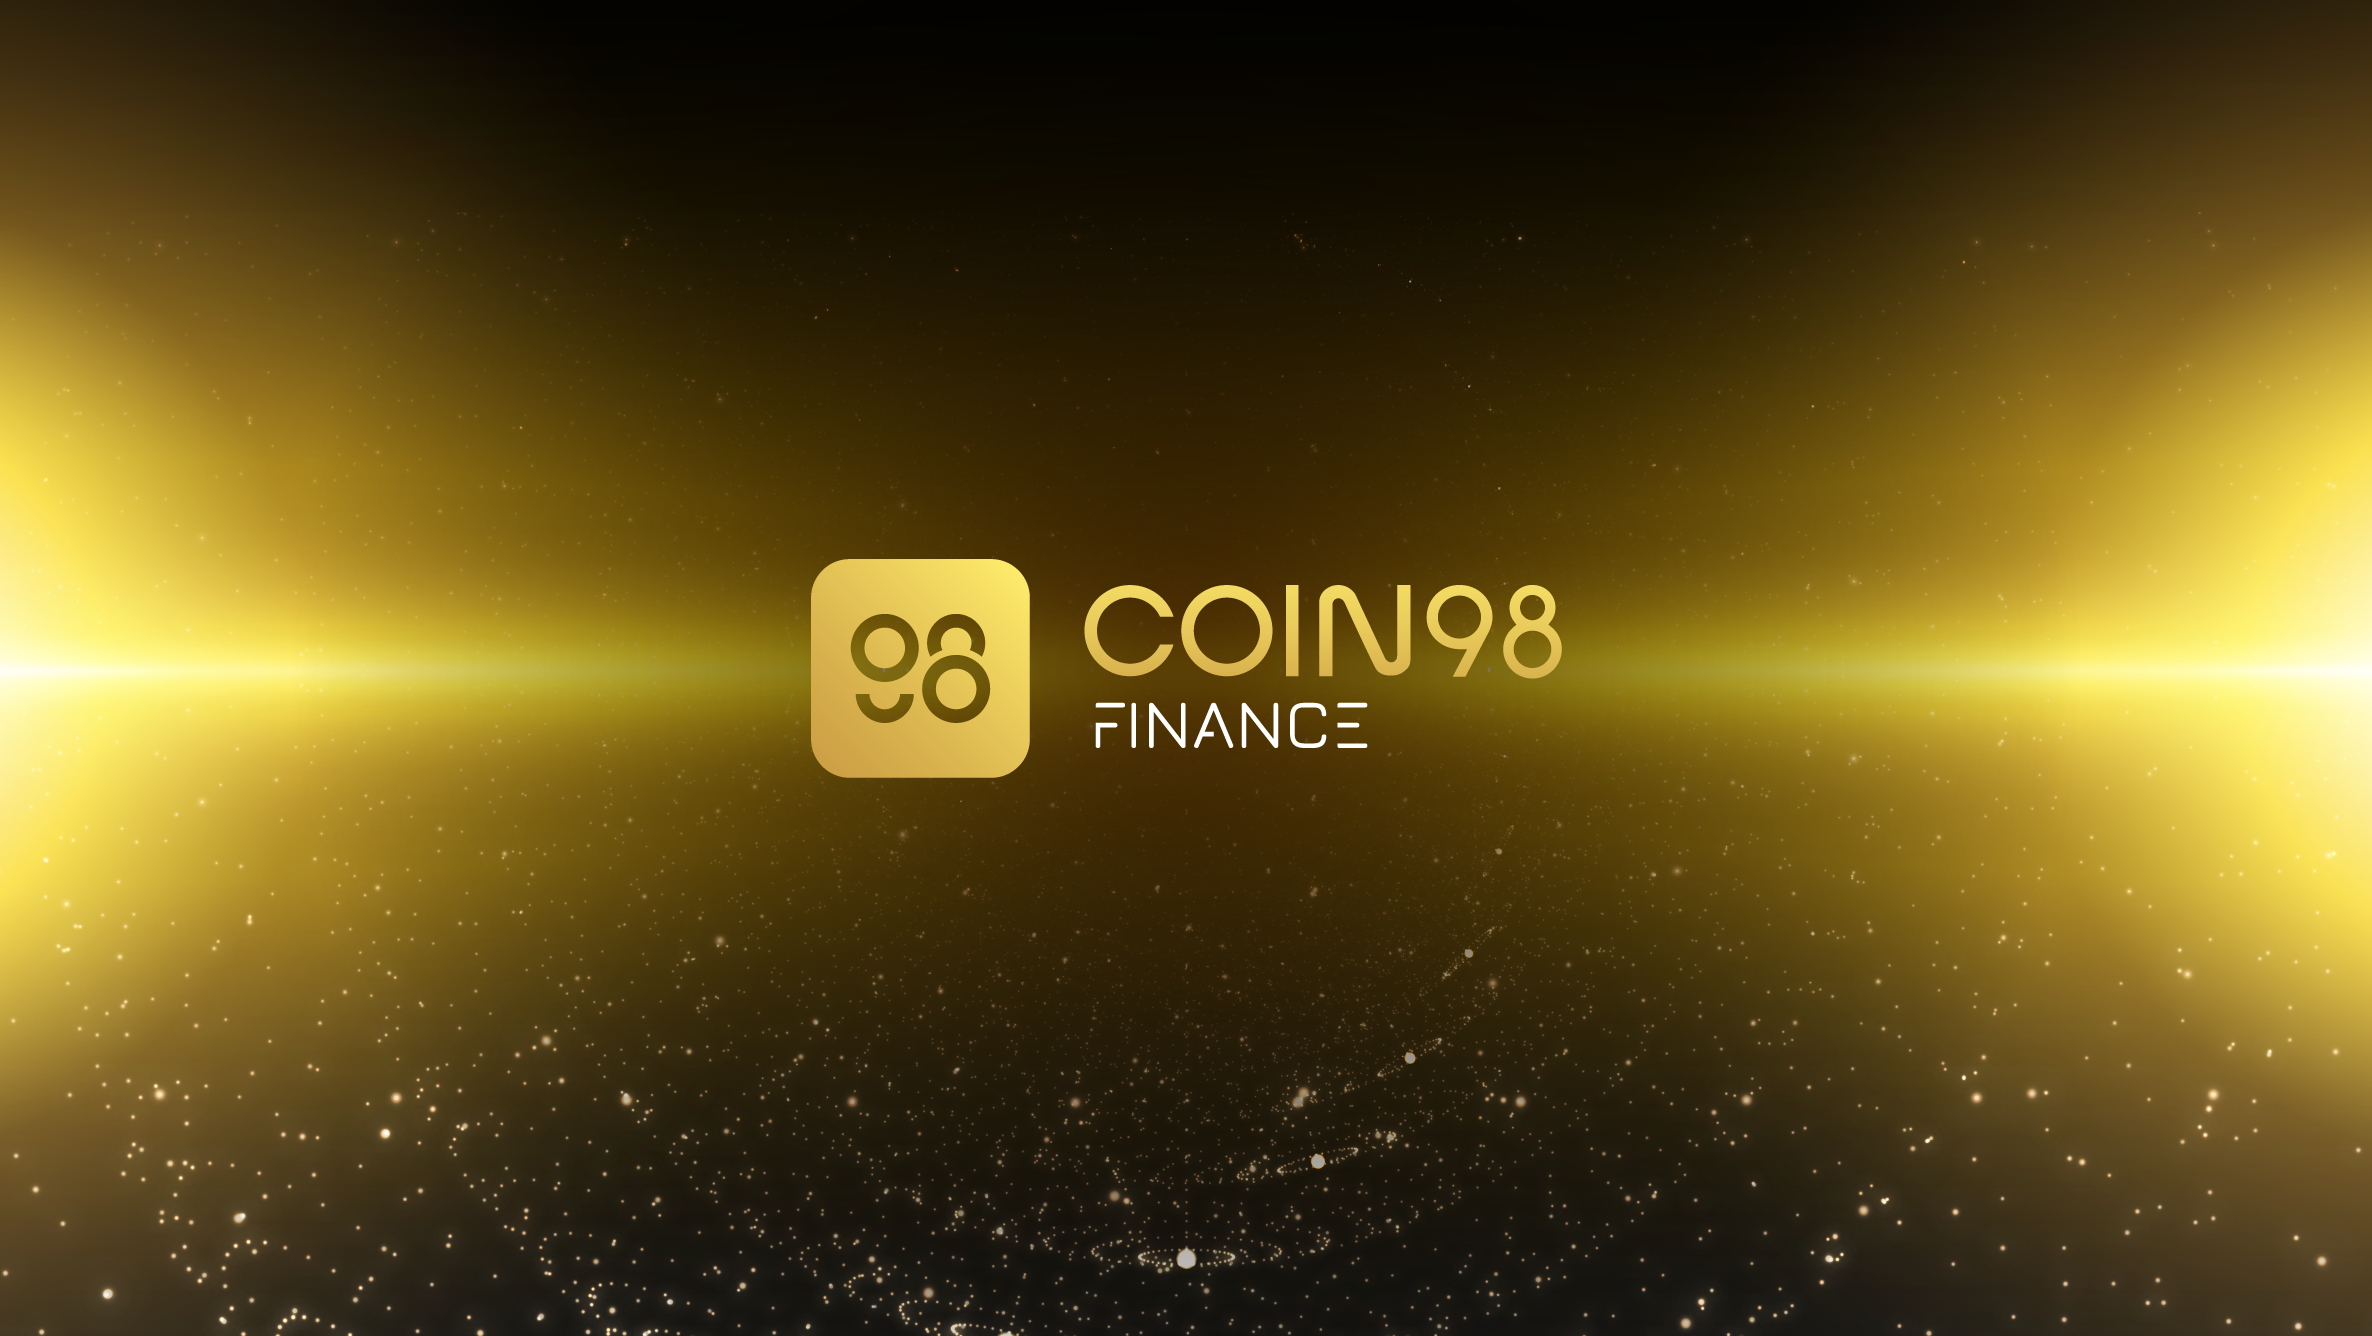 An introduction to Coin98 Finance